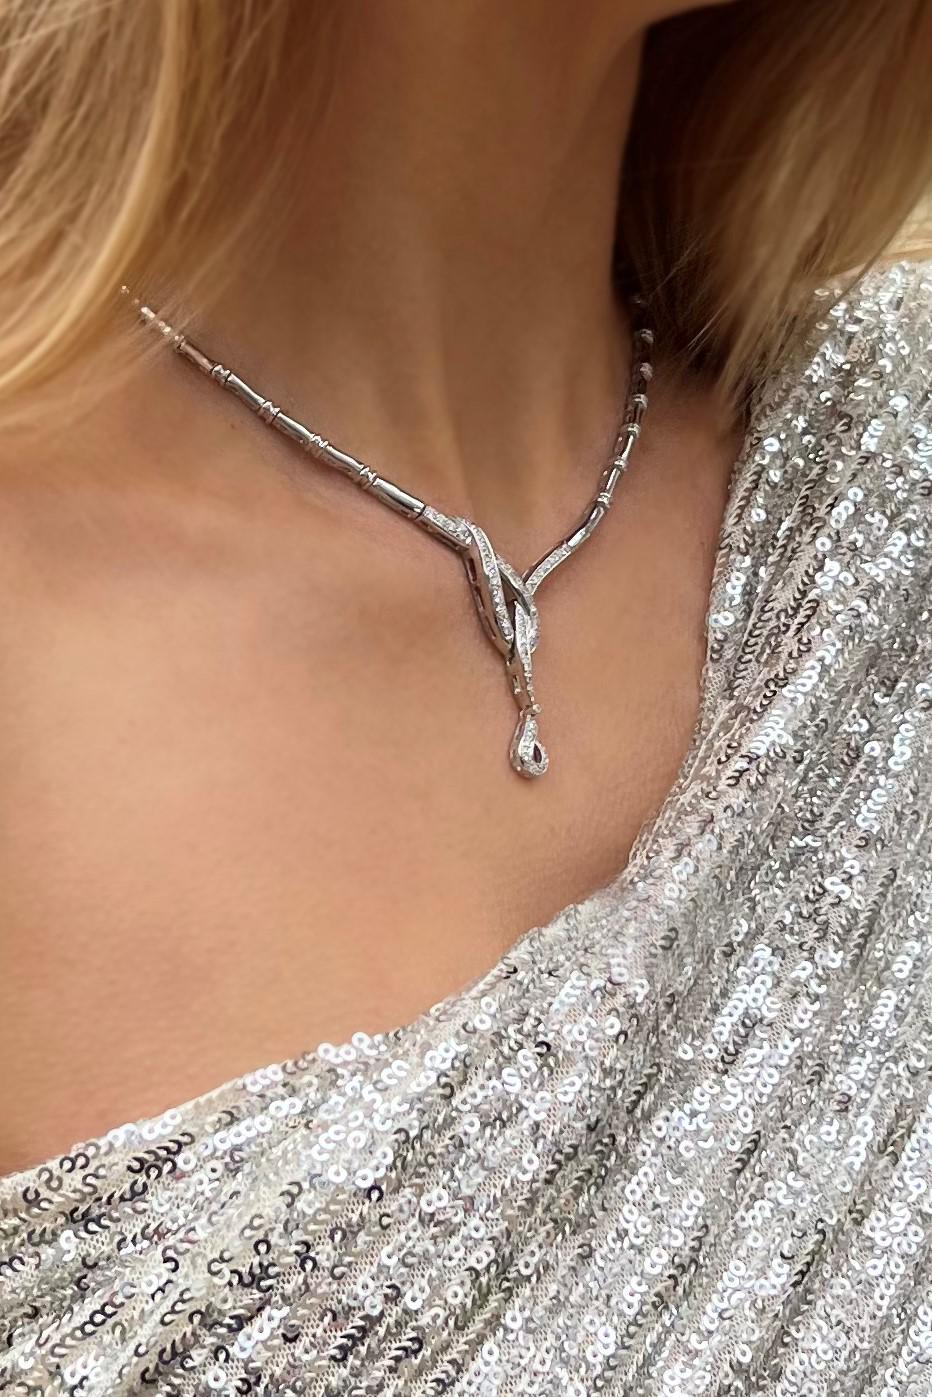 Diamond necklace in white gold 750 thousandths (18 carats). signed Zoughaib Lebanon. in the center a knotted pattern intertwined with 44 brilliant cut diamonds. held at the ends by a semi-articulated chain with bamboo pattern. total weight diamonds: